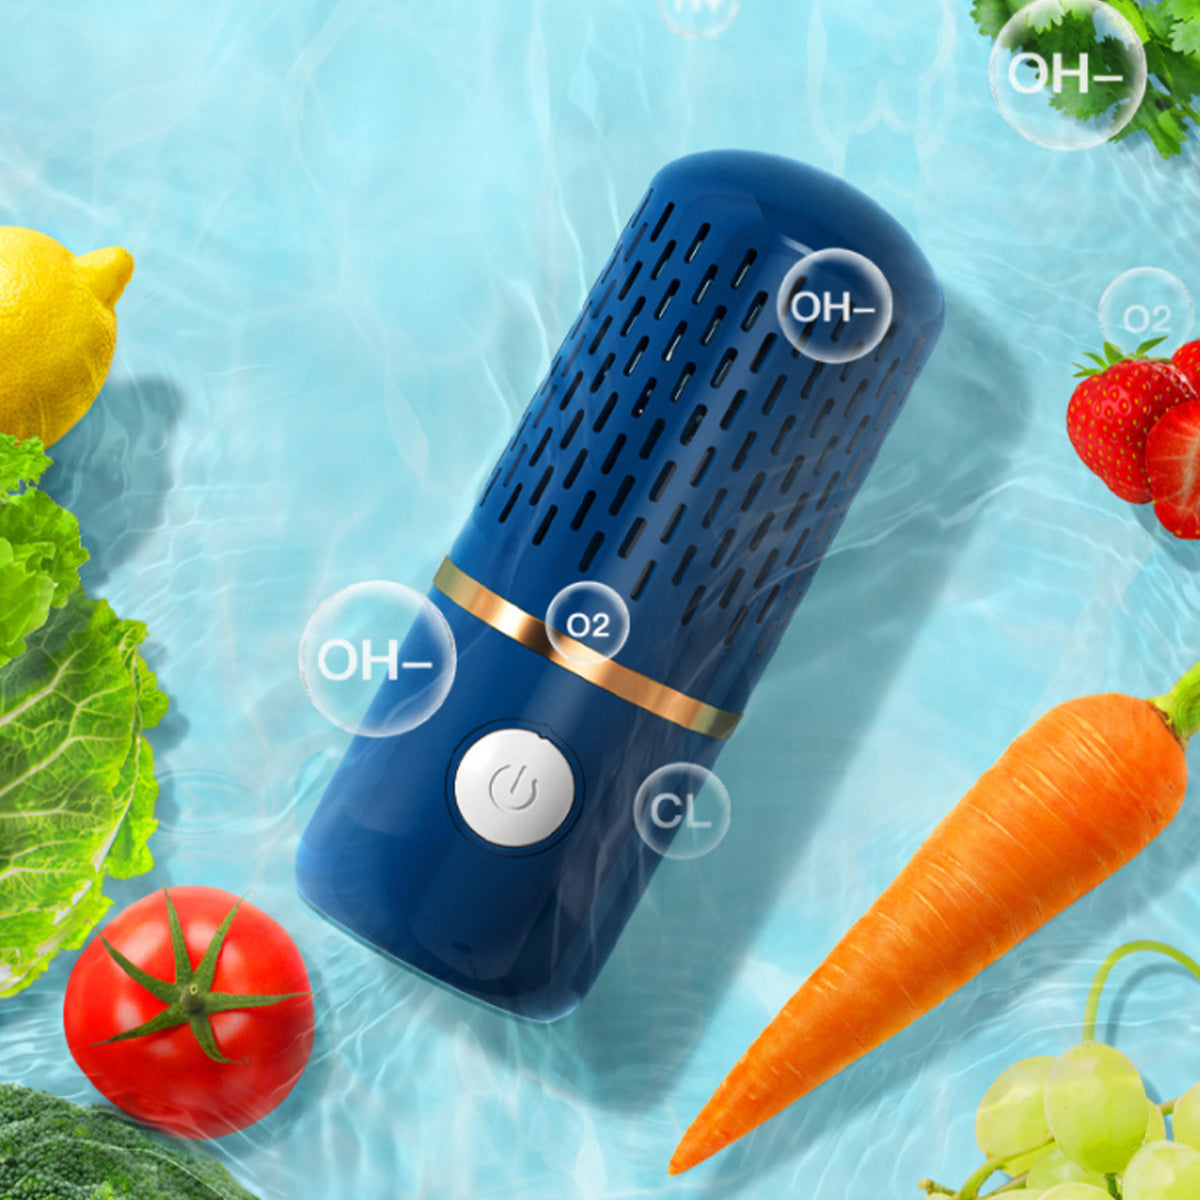 PureTech Ultrasonic Fruits And Veggie Cleaner by VistaShops